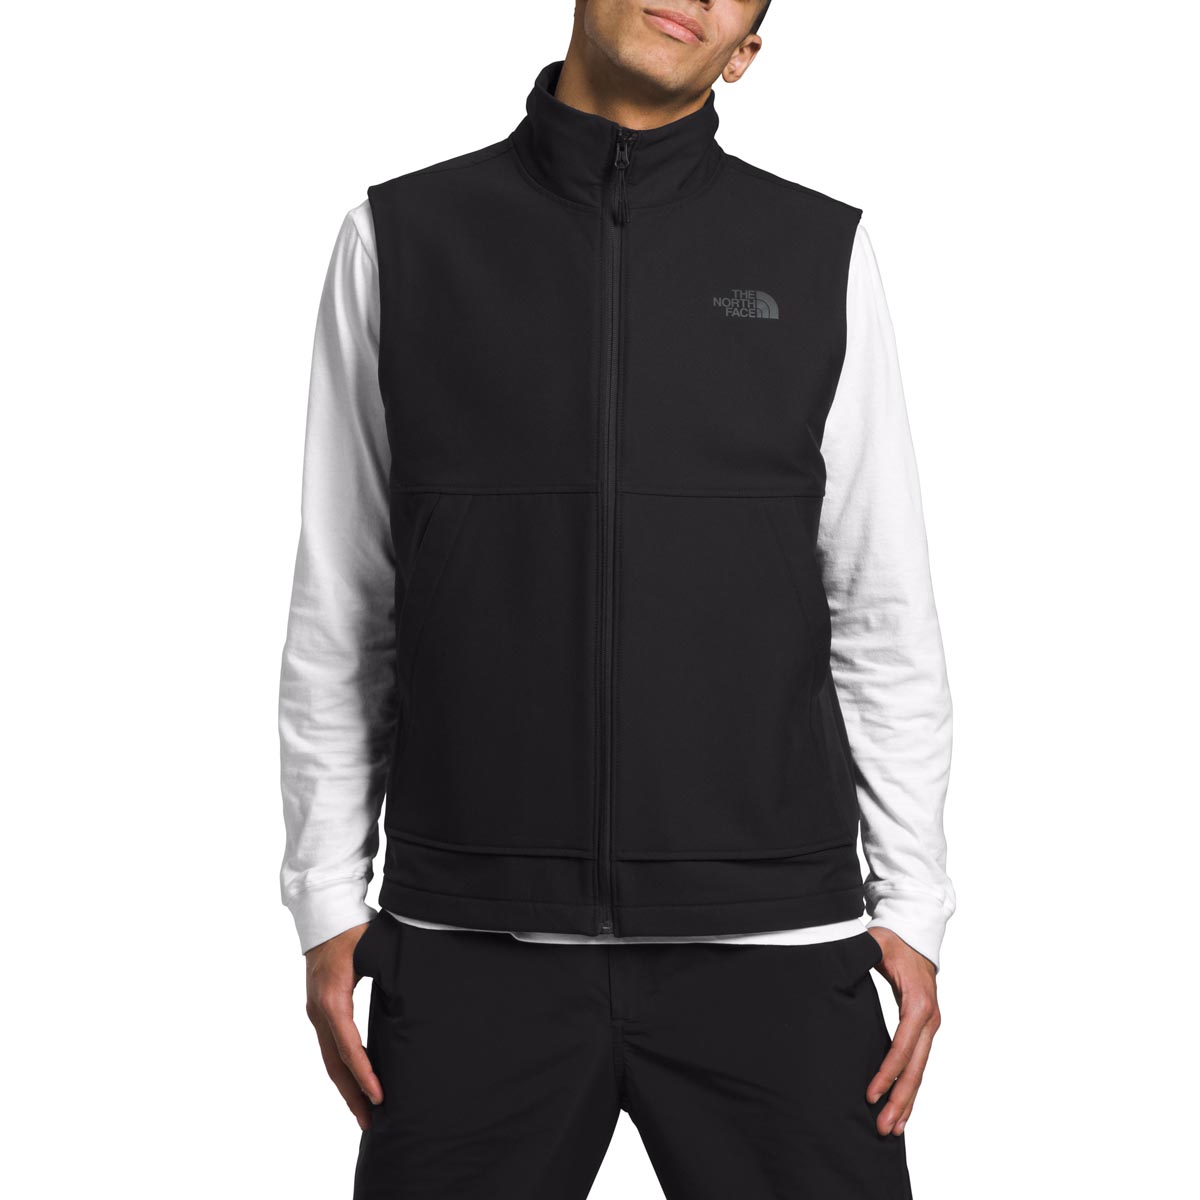 The North Face Men's Camden Thermal Vest